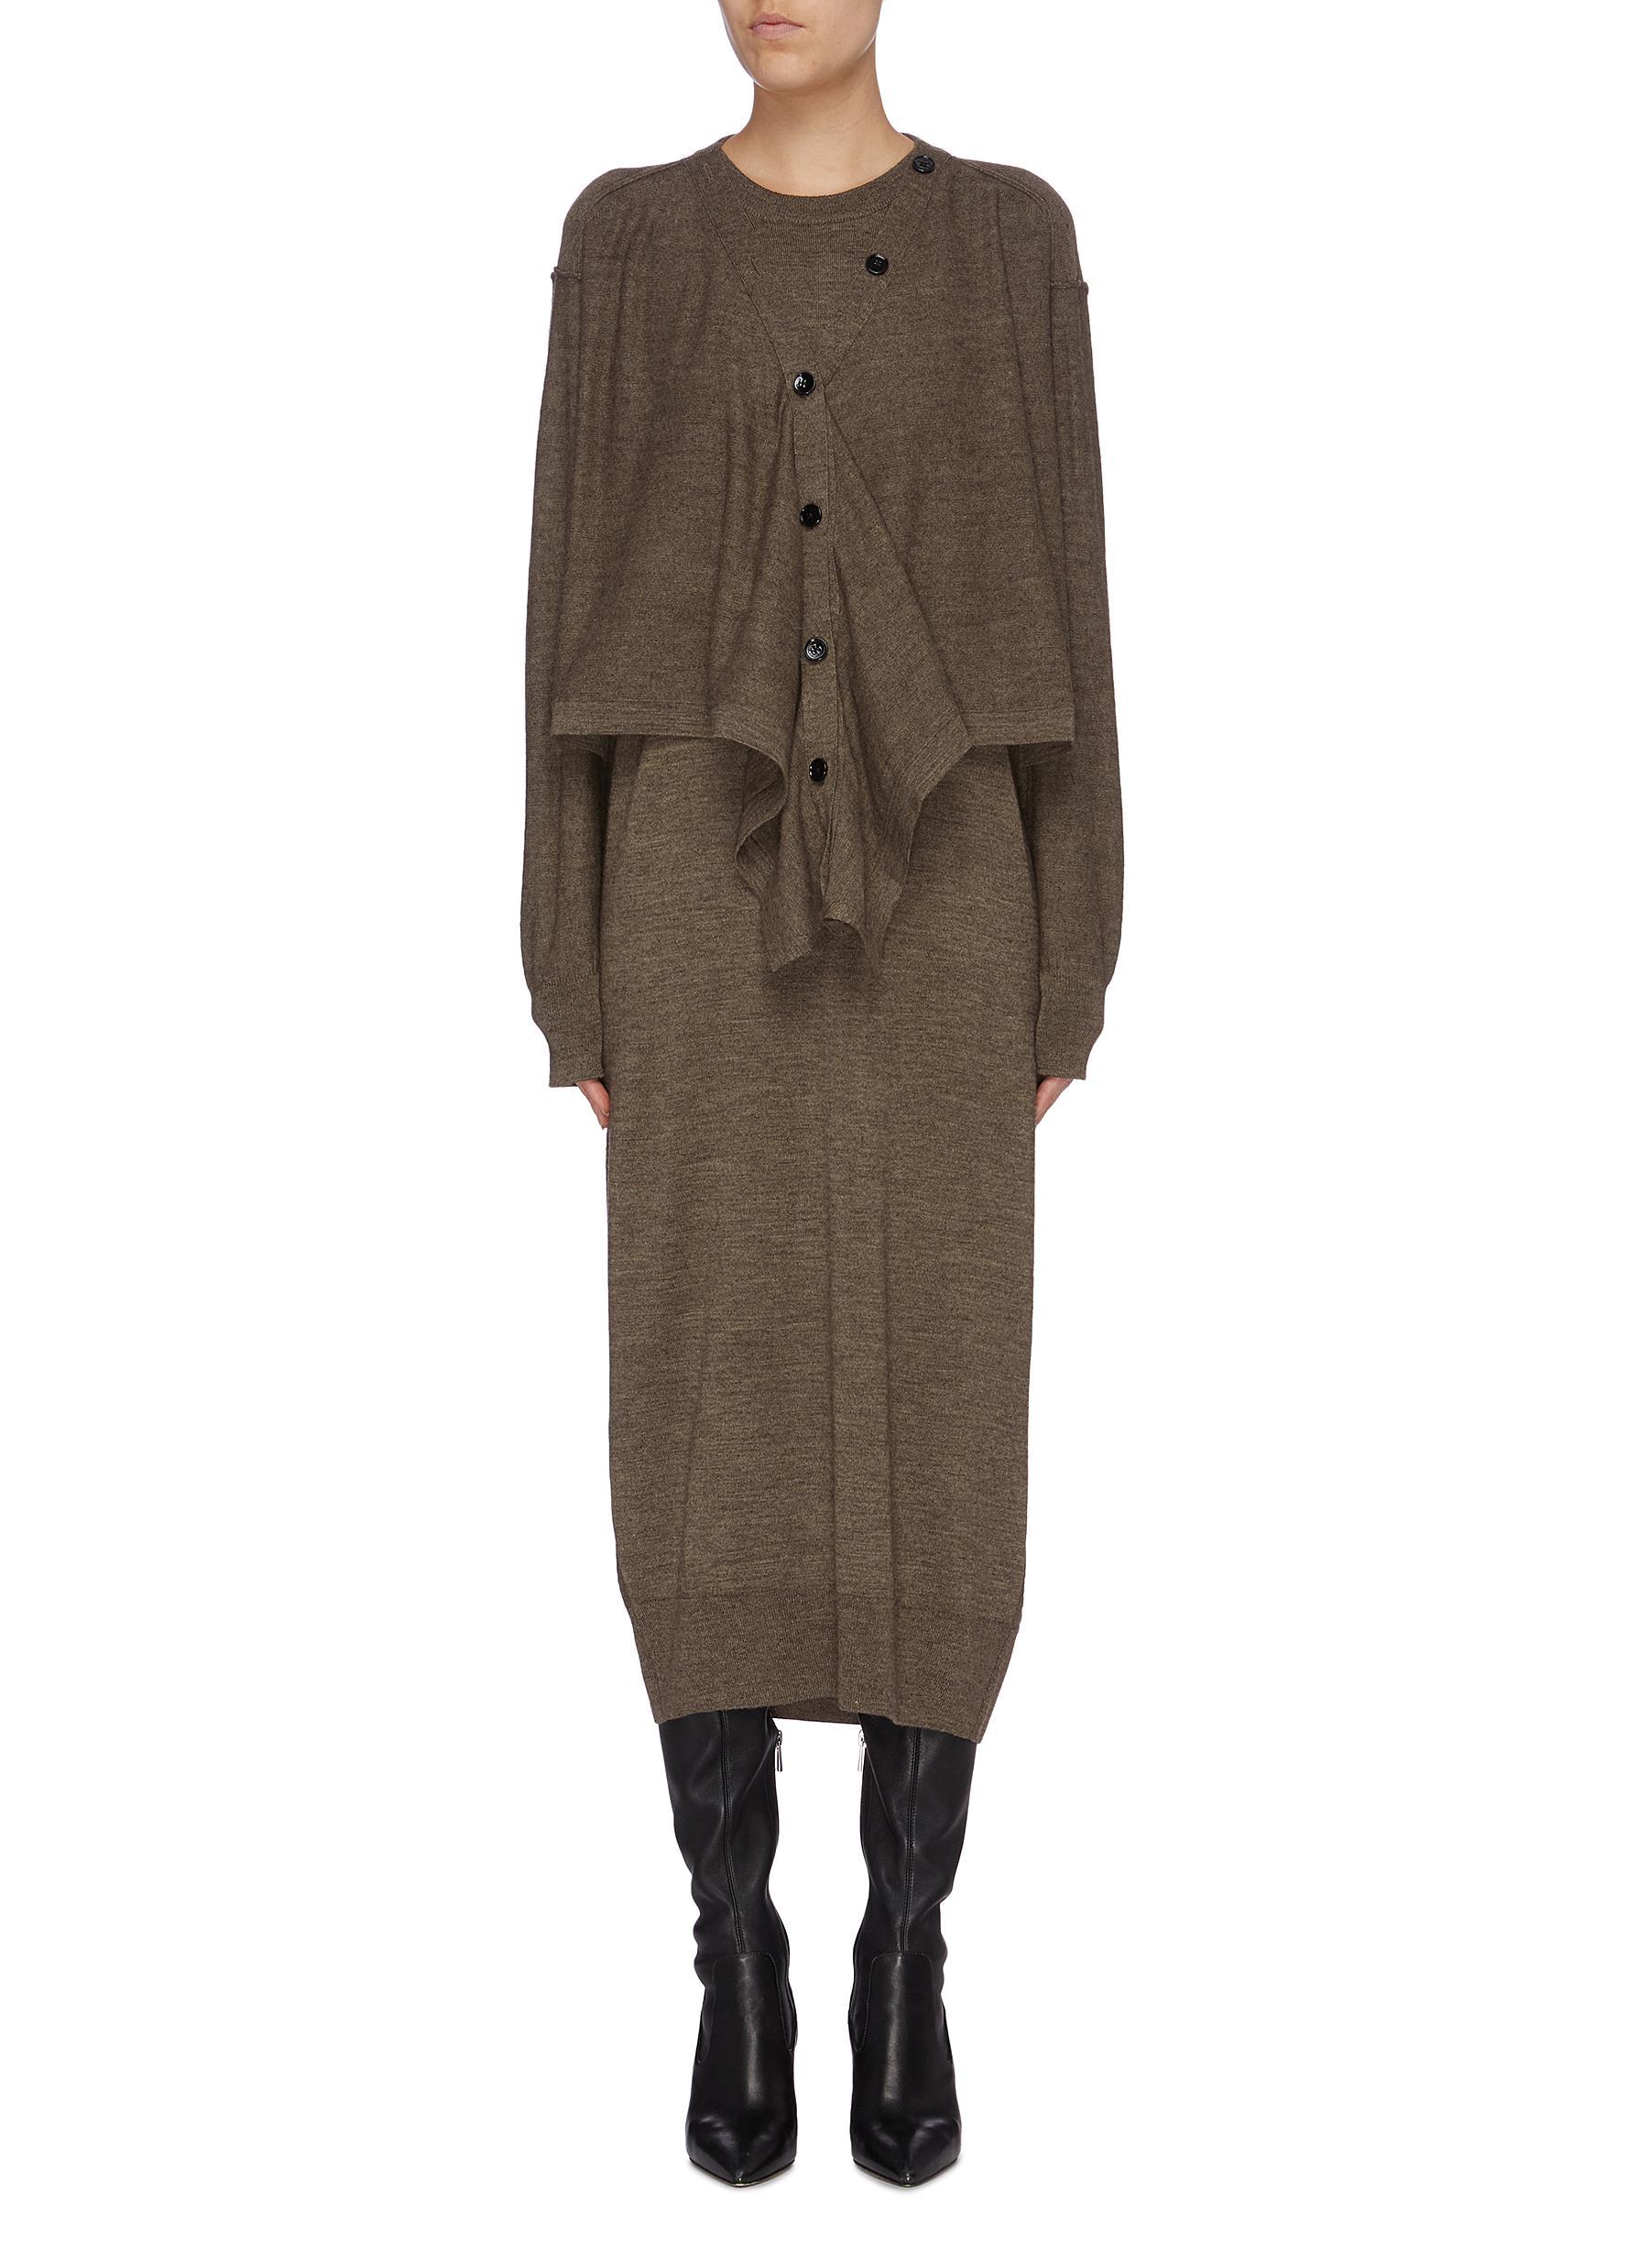 Lemaire Cardigan Panel Merino Wool-dralon Knit Dress in Brown - Lyst